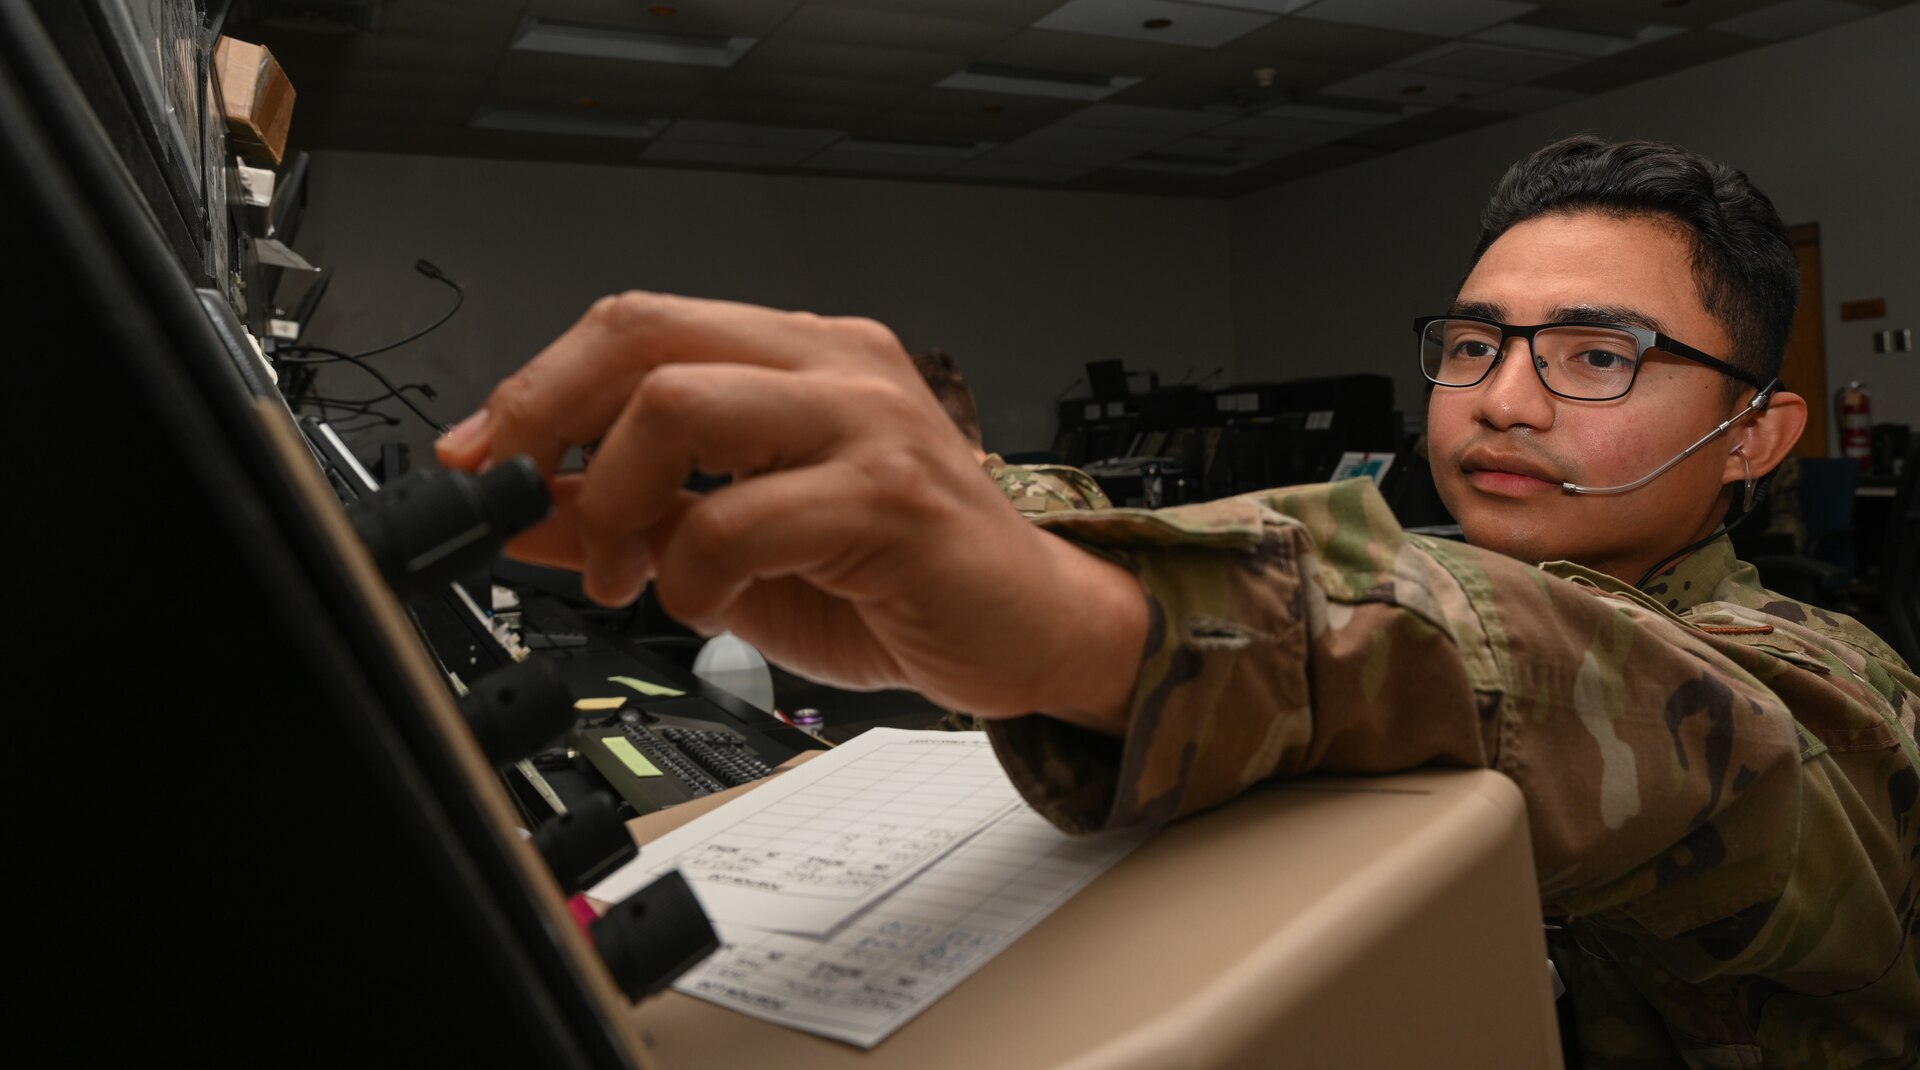 U.S. Air Force Senior Airman Gabriel Leon, a 509th Operations Support Squadron air traffic controller journeymen, poses for a photo in the Radar Approach Control Center on Whiteman Air Force Base May 25, 2022. Air traffic controller are responsible for managing the flow of aircraft through all aspects of their flight. (U.S. Air Force by Airman 1st Class Bryson Britt)